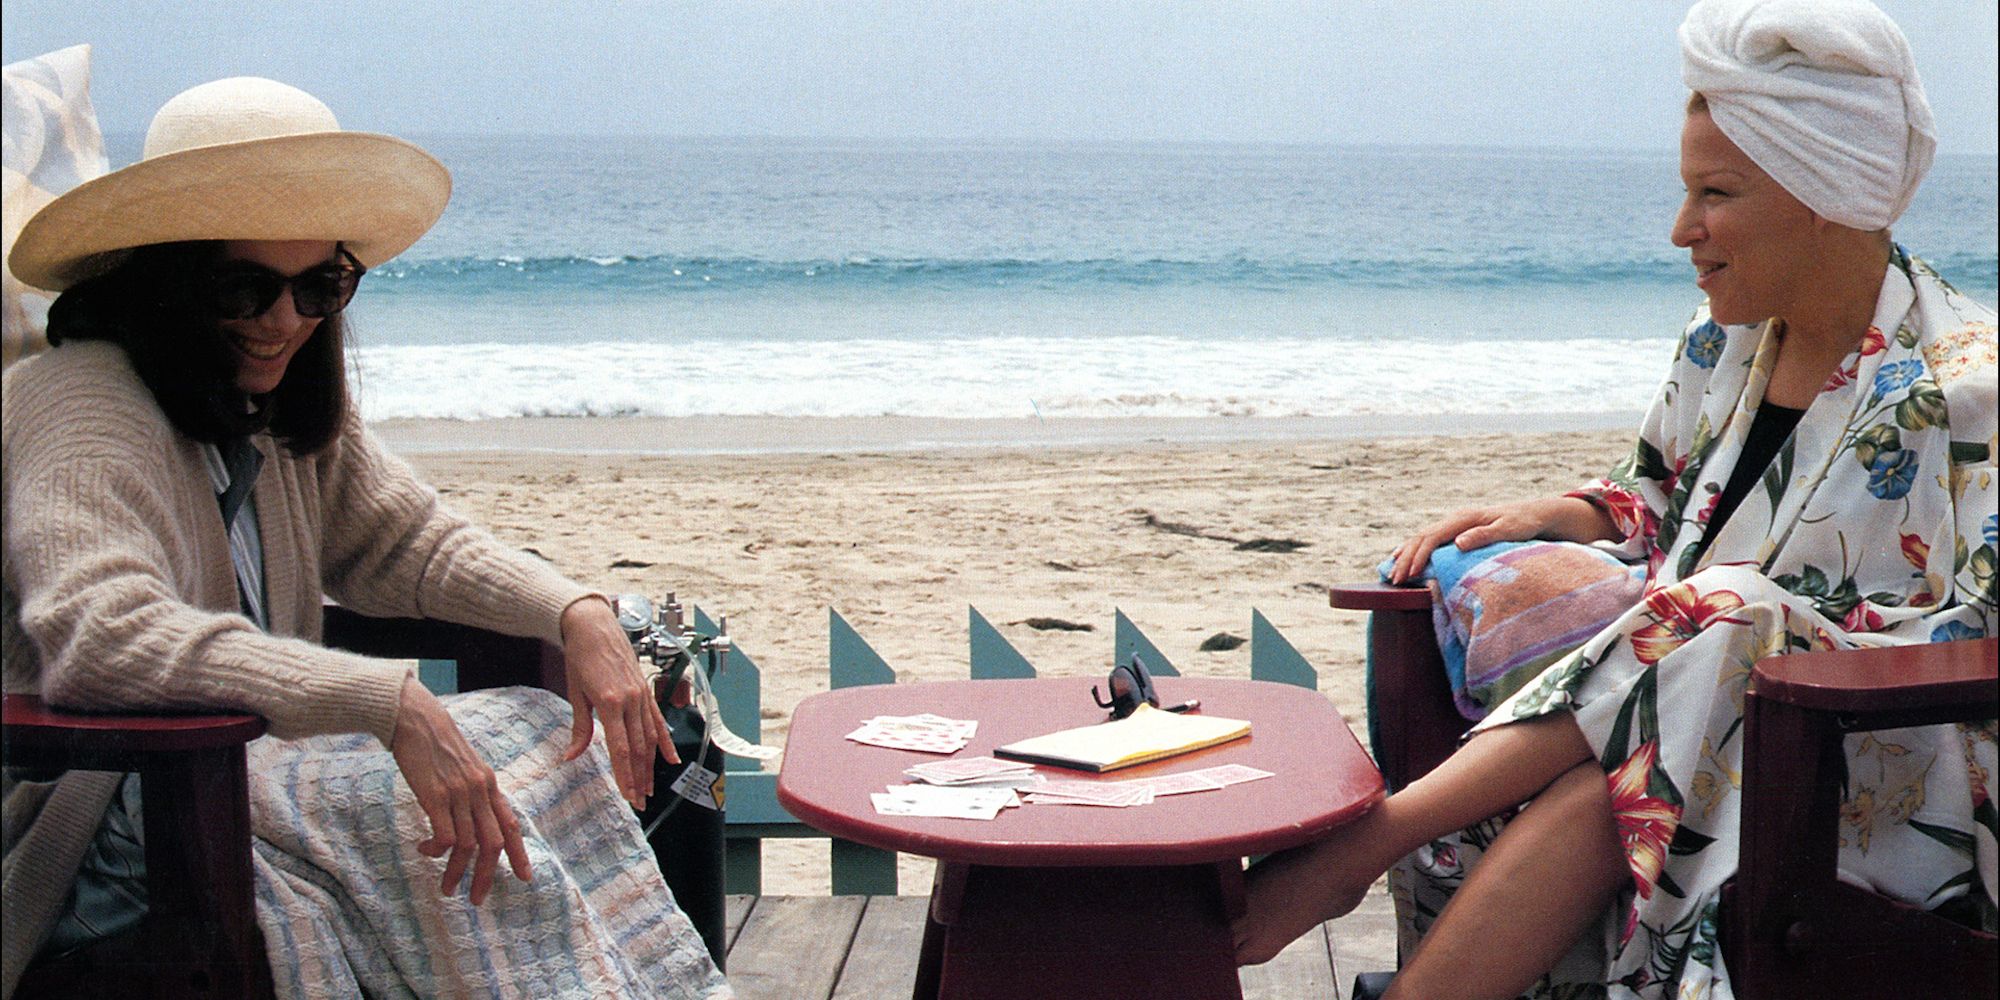 Bette Midler and Barbara Hershey in Beaches